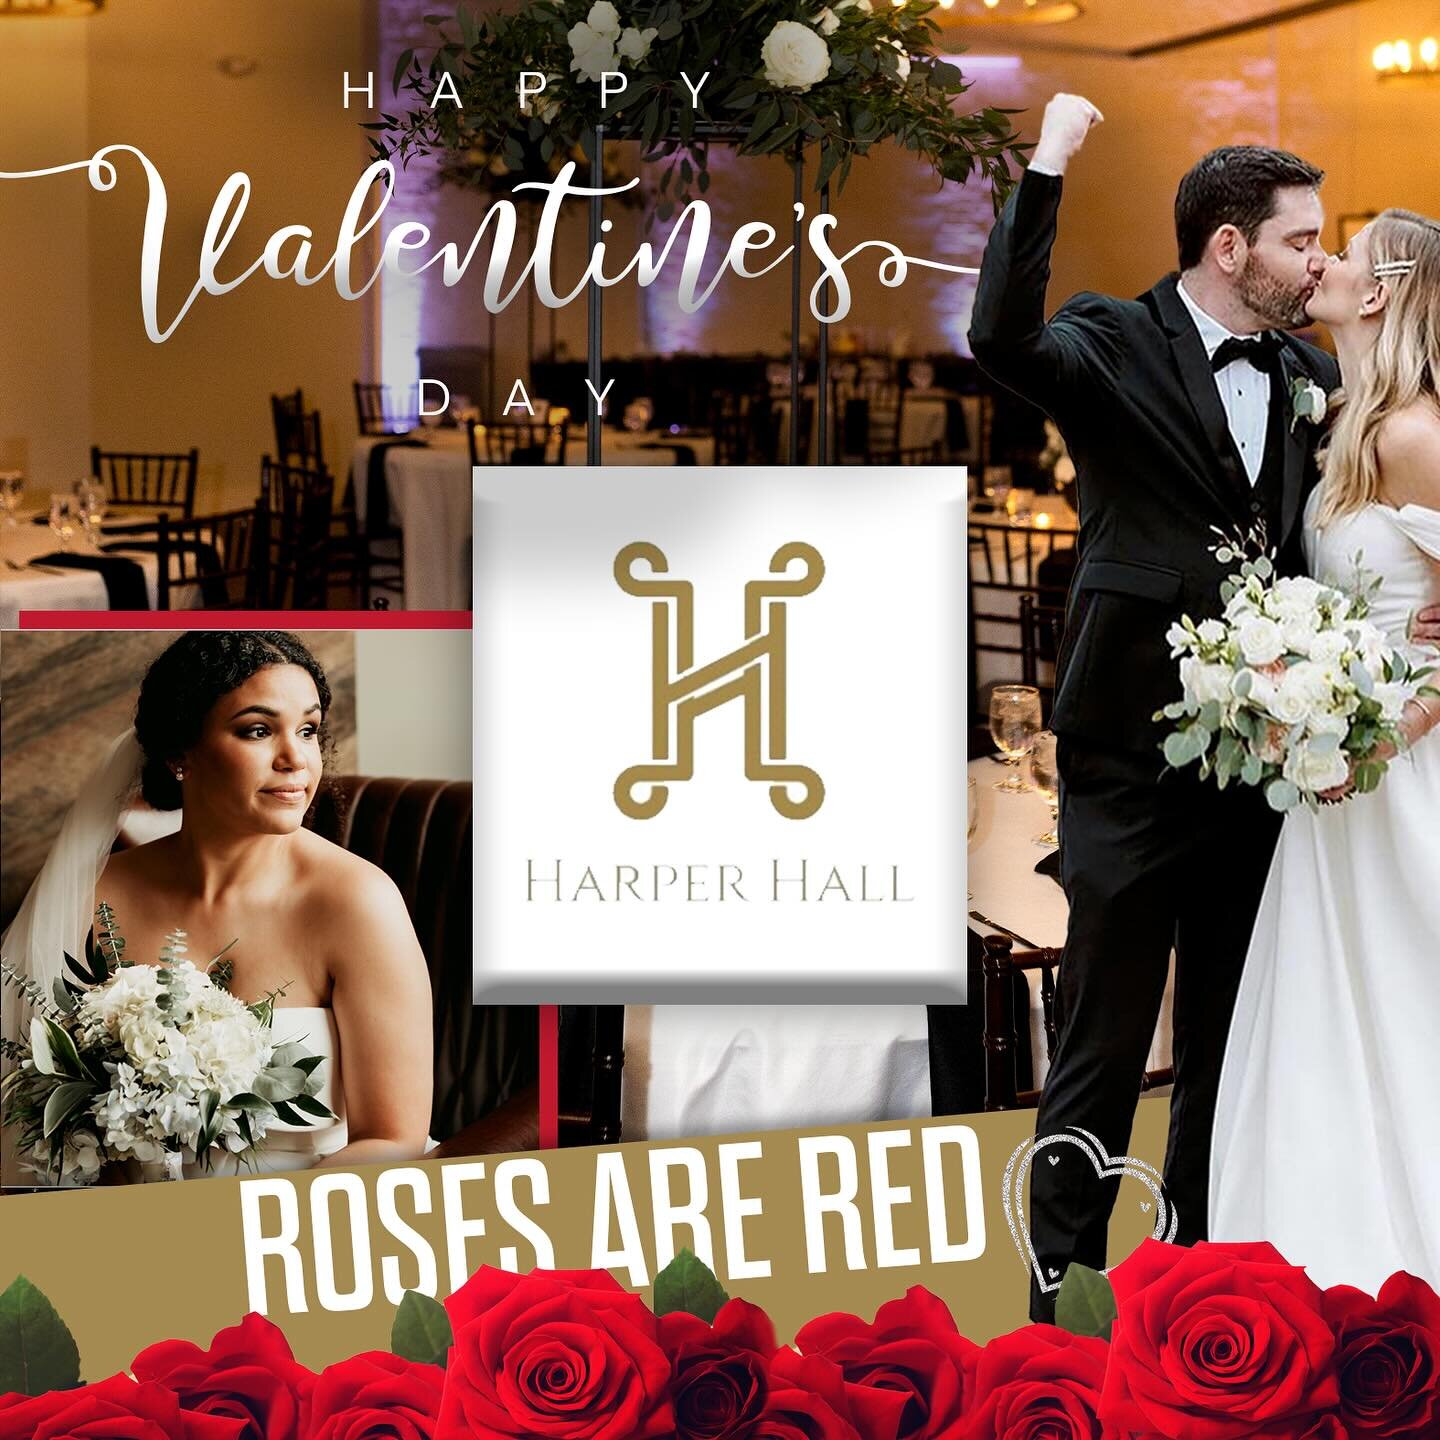 No one knows love like Harper Hall and we want to wish a very happy Valentine&rsquo;s Day to all of those that shared their love with our venue 🫶

#simplylovelex #weddingvenue #eventvenue #valentines #loveisintheair